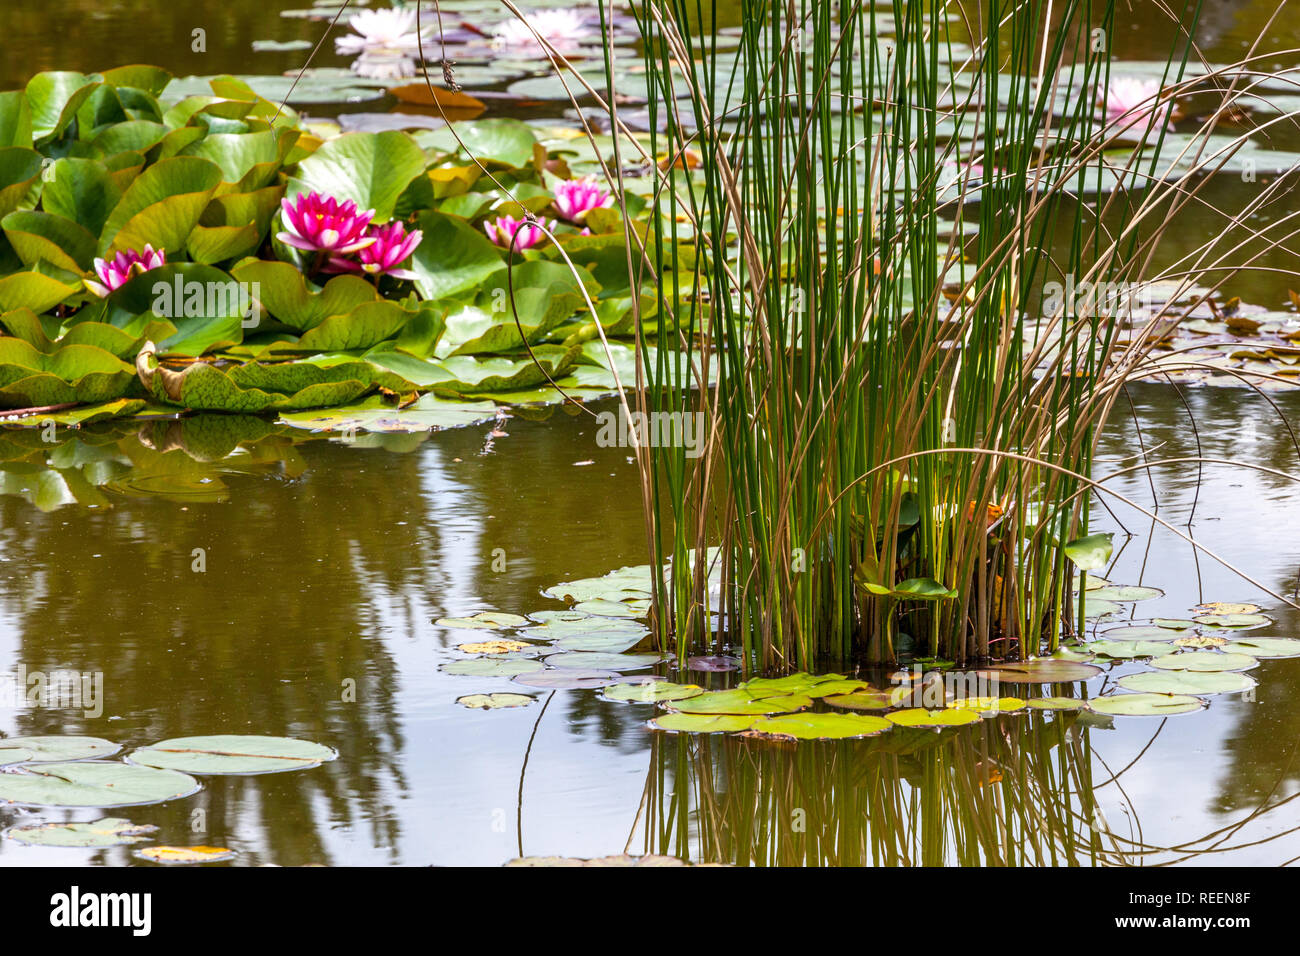 Garden pond with water plants Stock Photo